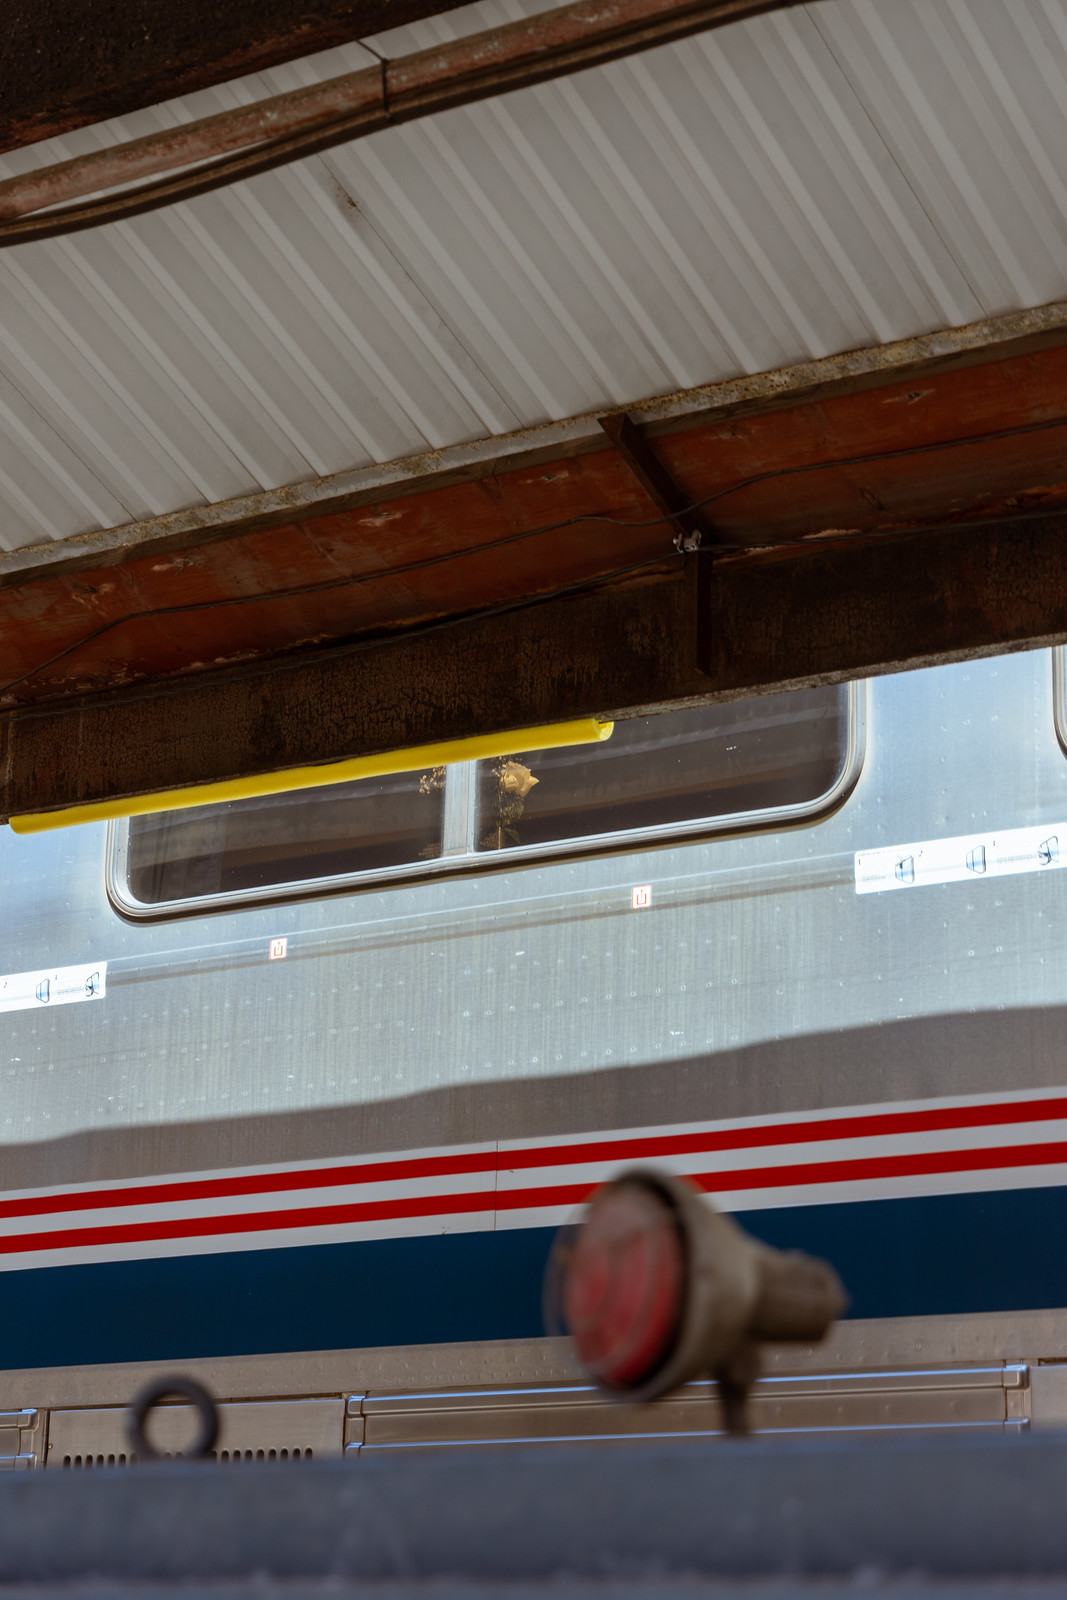 A flower in the window of a Superliner dining car, seen from the station platform below, under a tin roof and with an object bearing a red light at the bottom of the frame.